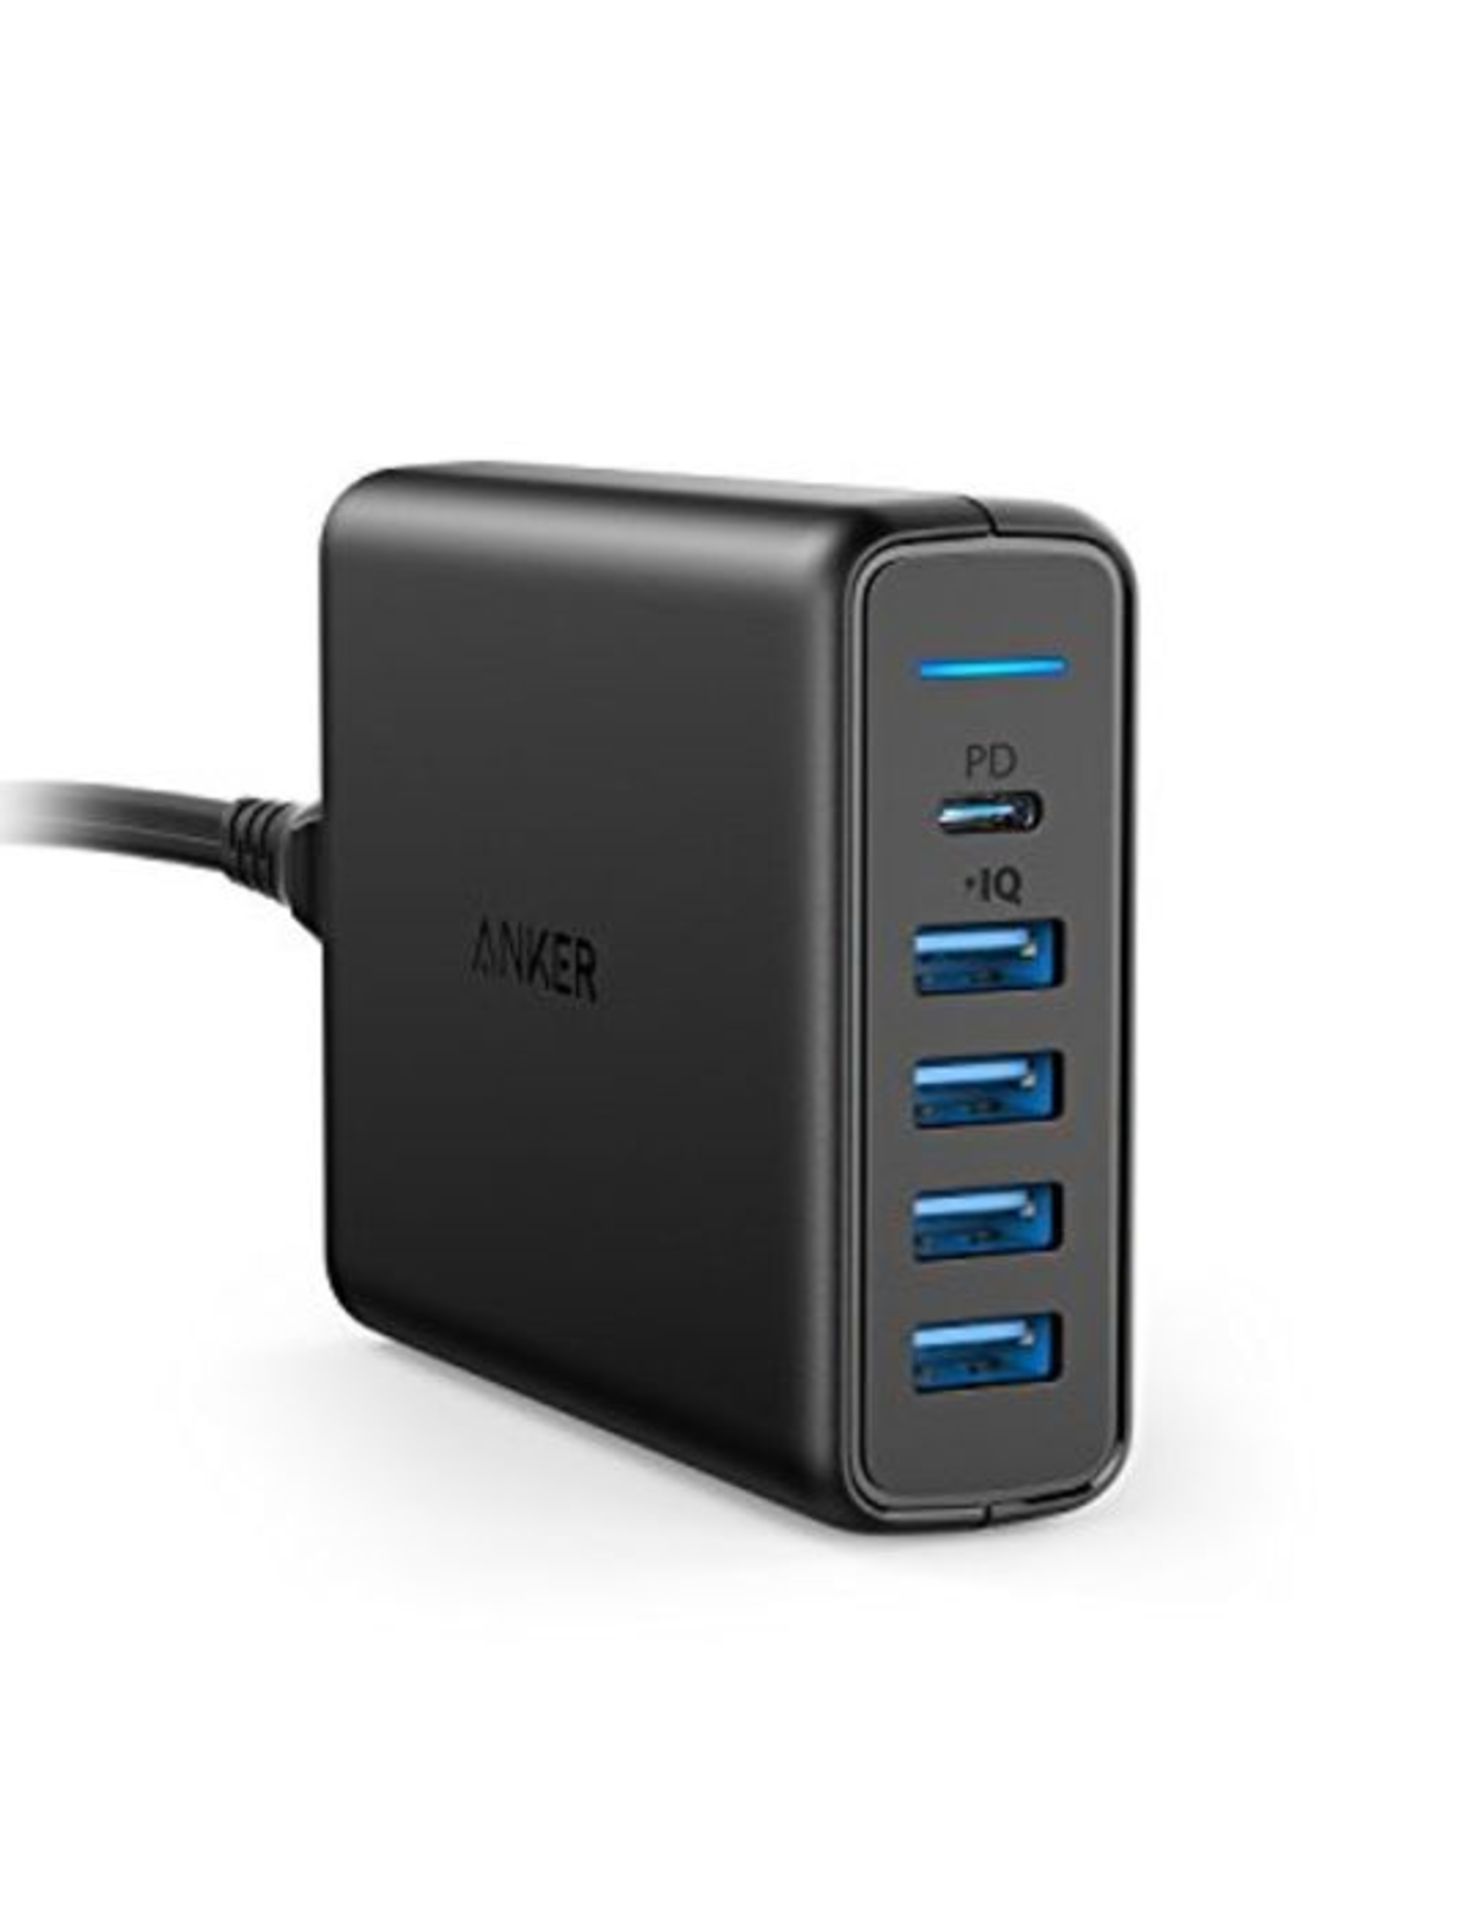 Anker USB C Wall Charger, Premium 60W 5-Port Desktop Charger with One 30W Power Delive